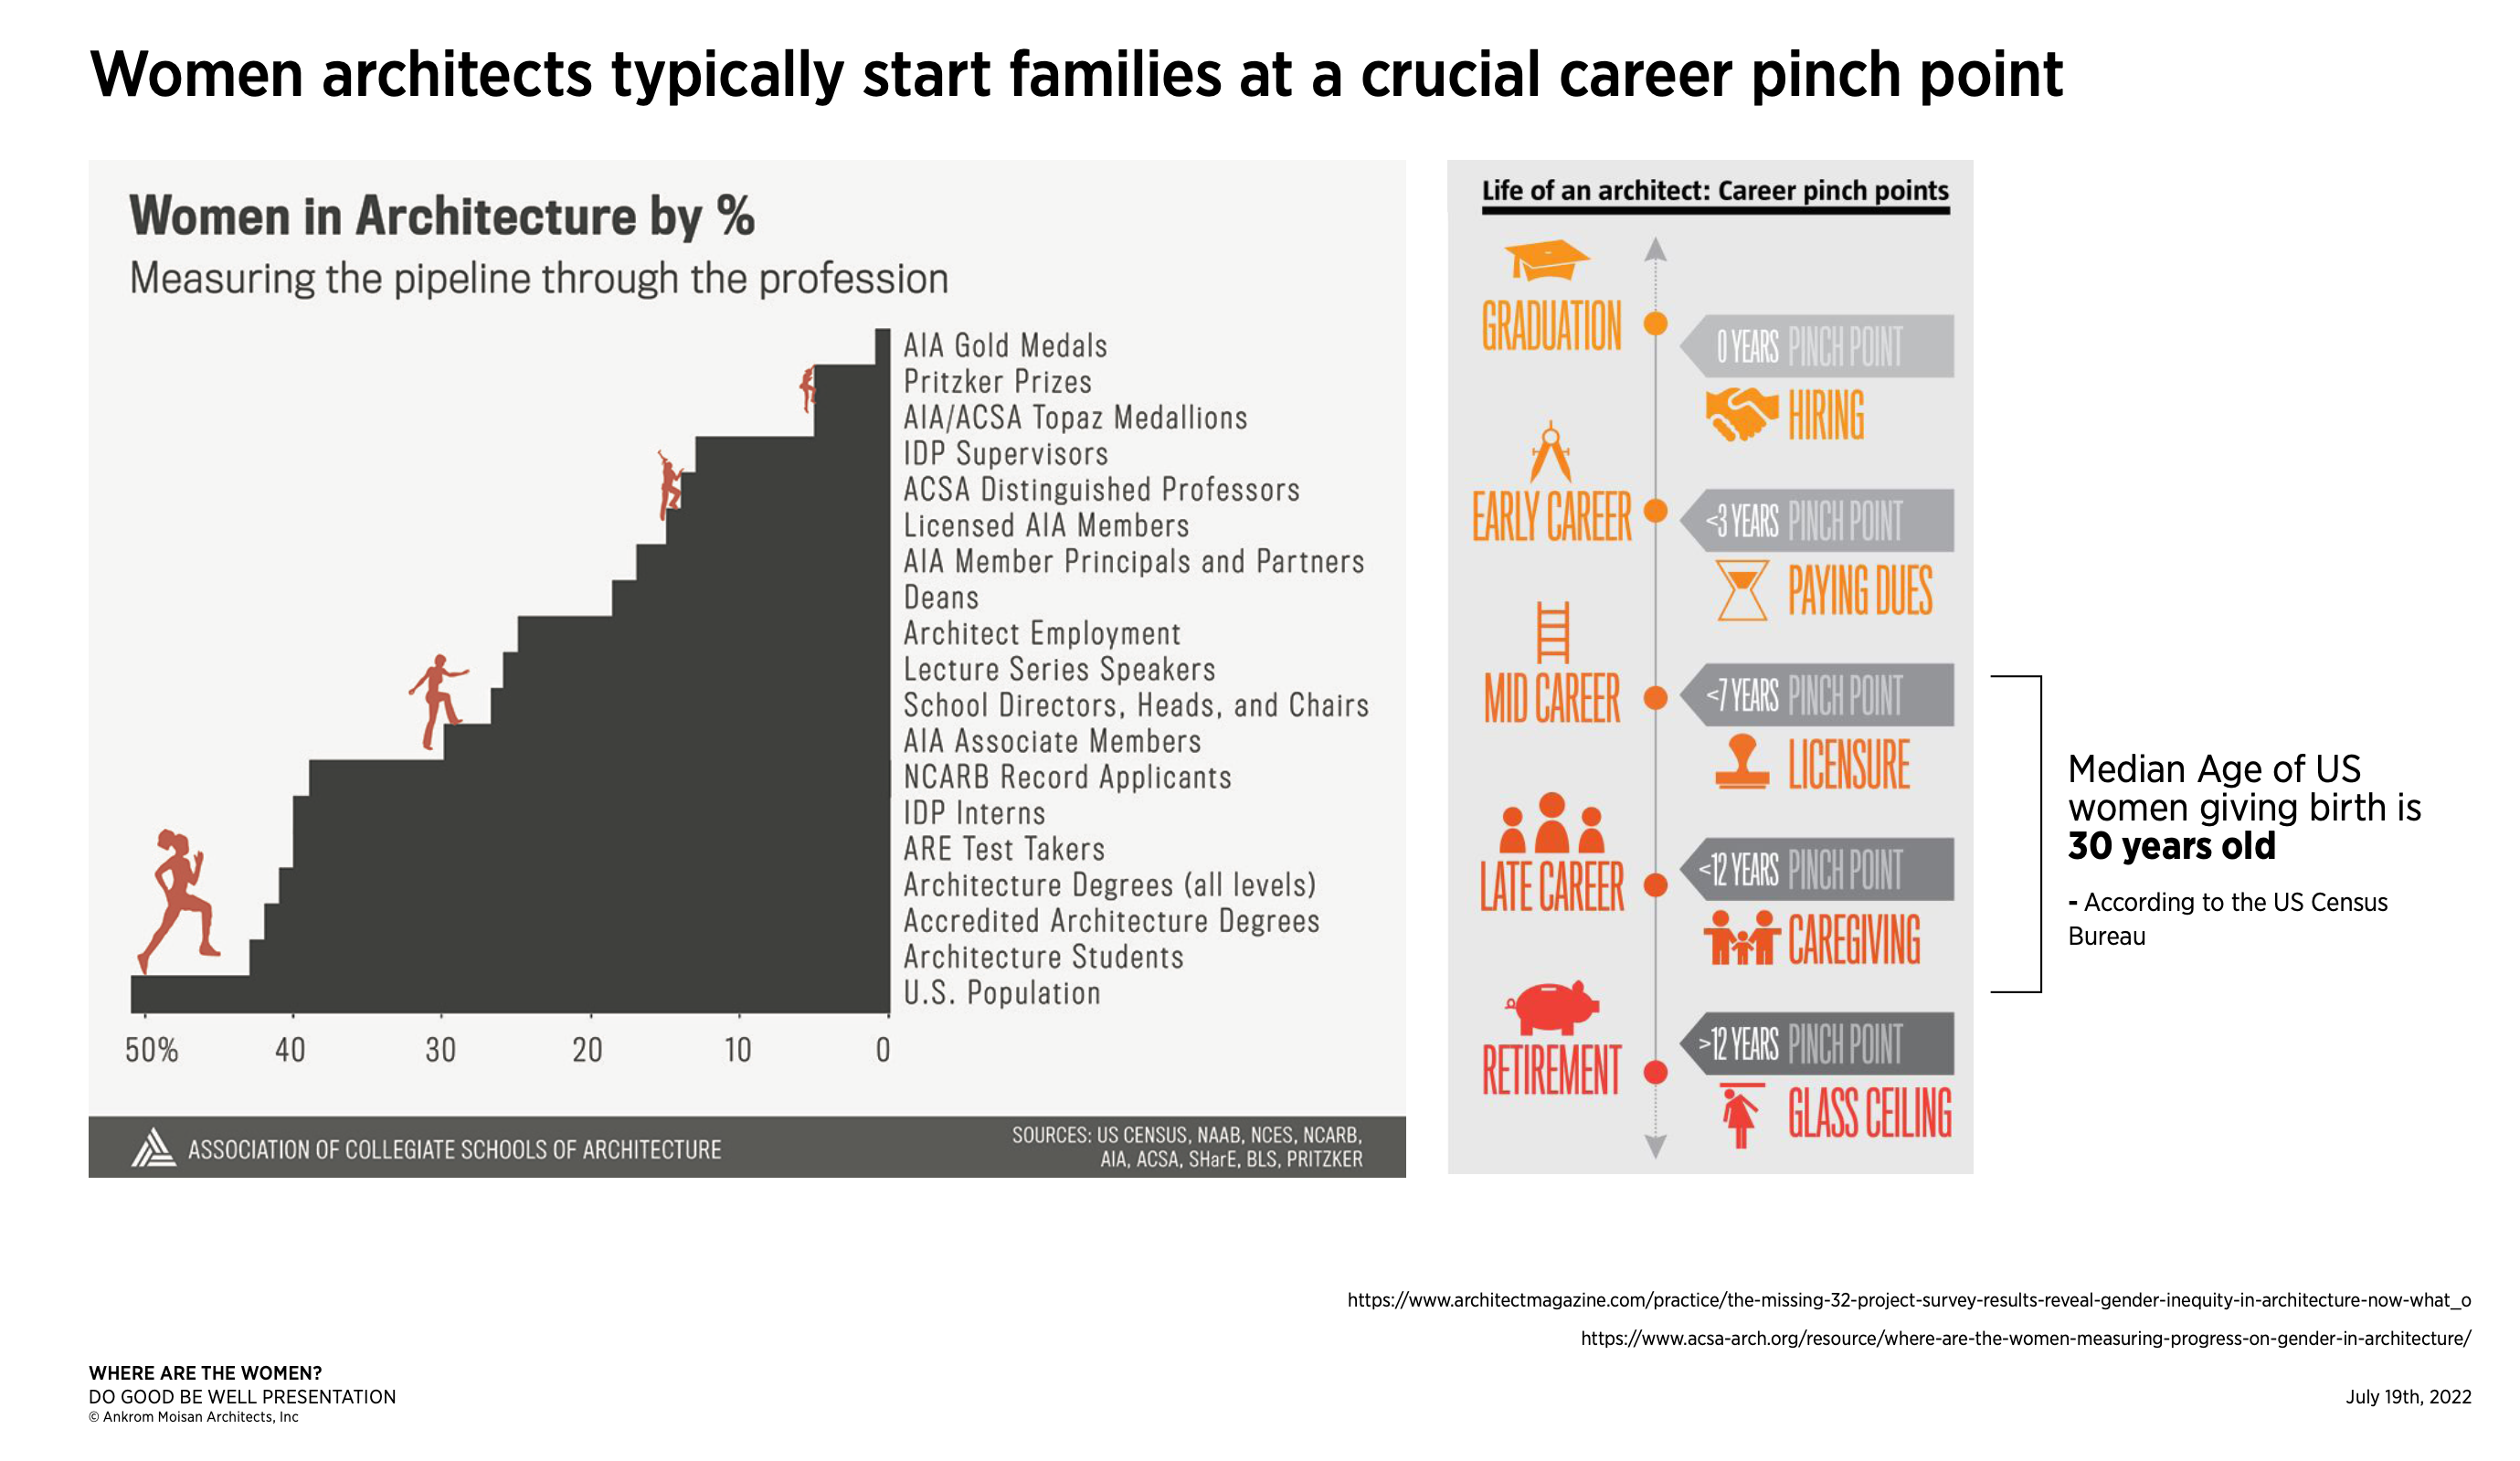 Illustration of how childbirth impacts the careers of women.